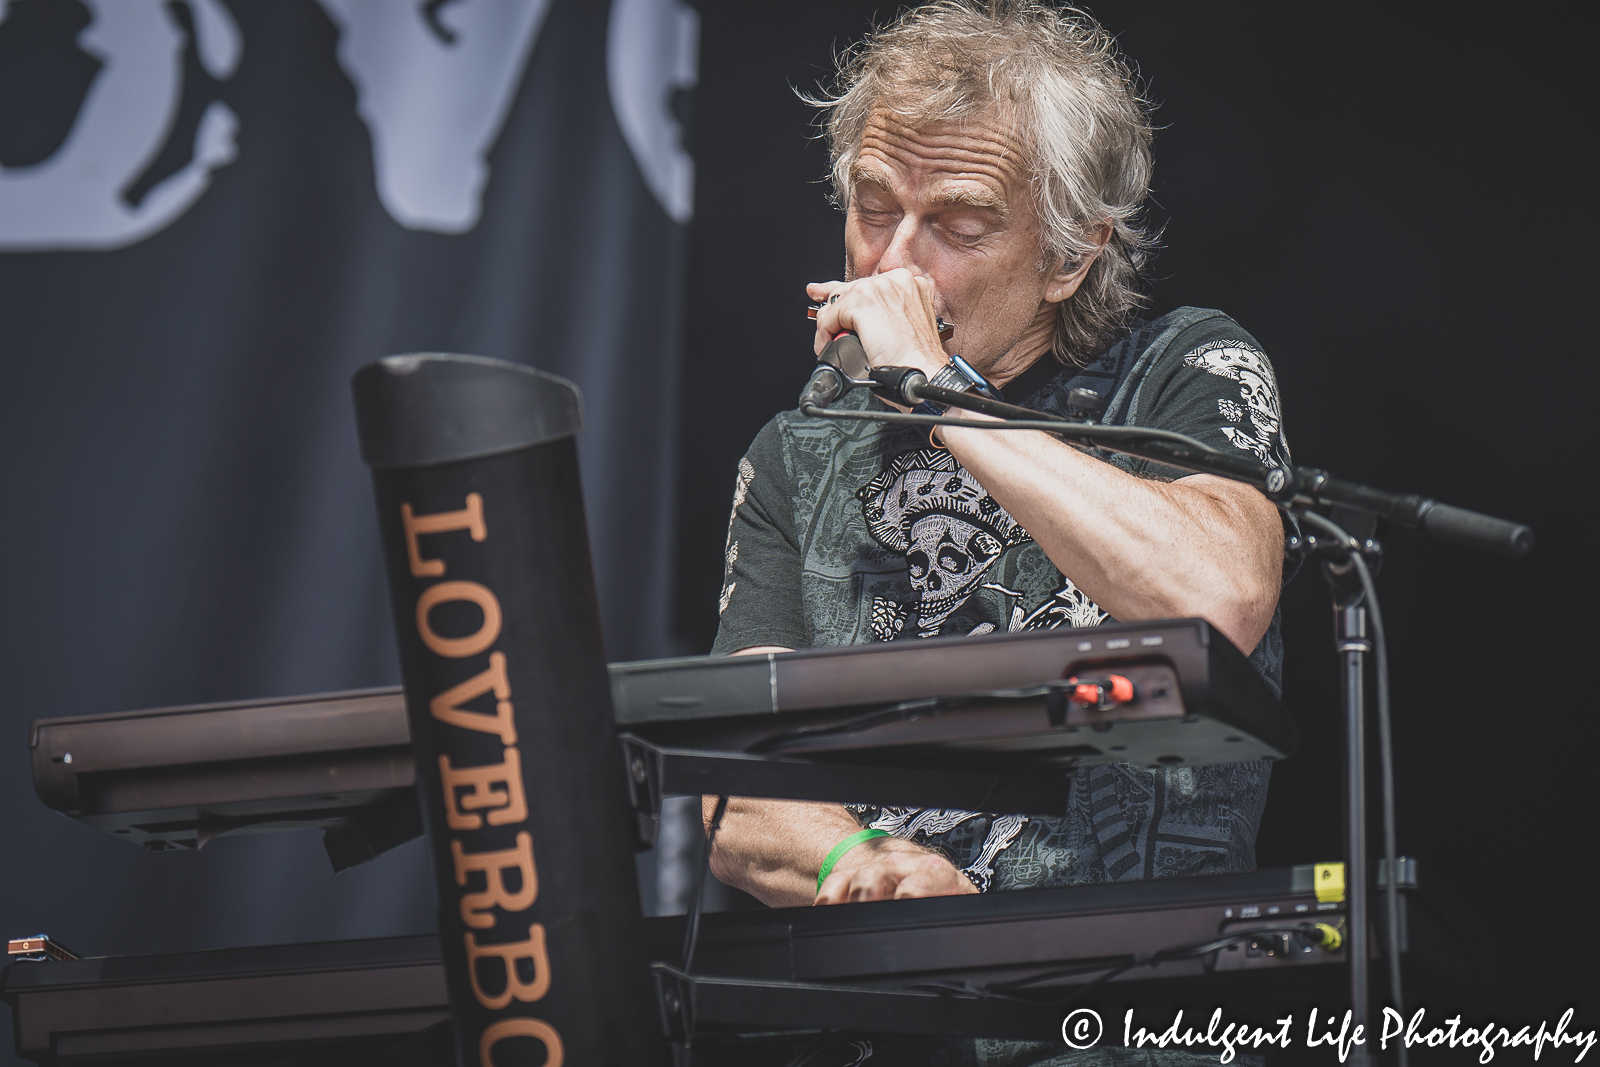 Loverboy keyboardist Doug Johnson opening the show at Starlight Theatre in Kansas City, MO on June 14, 2022.